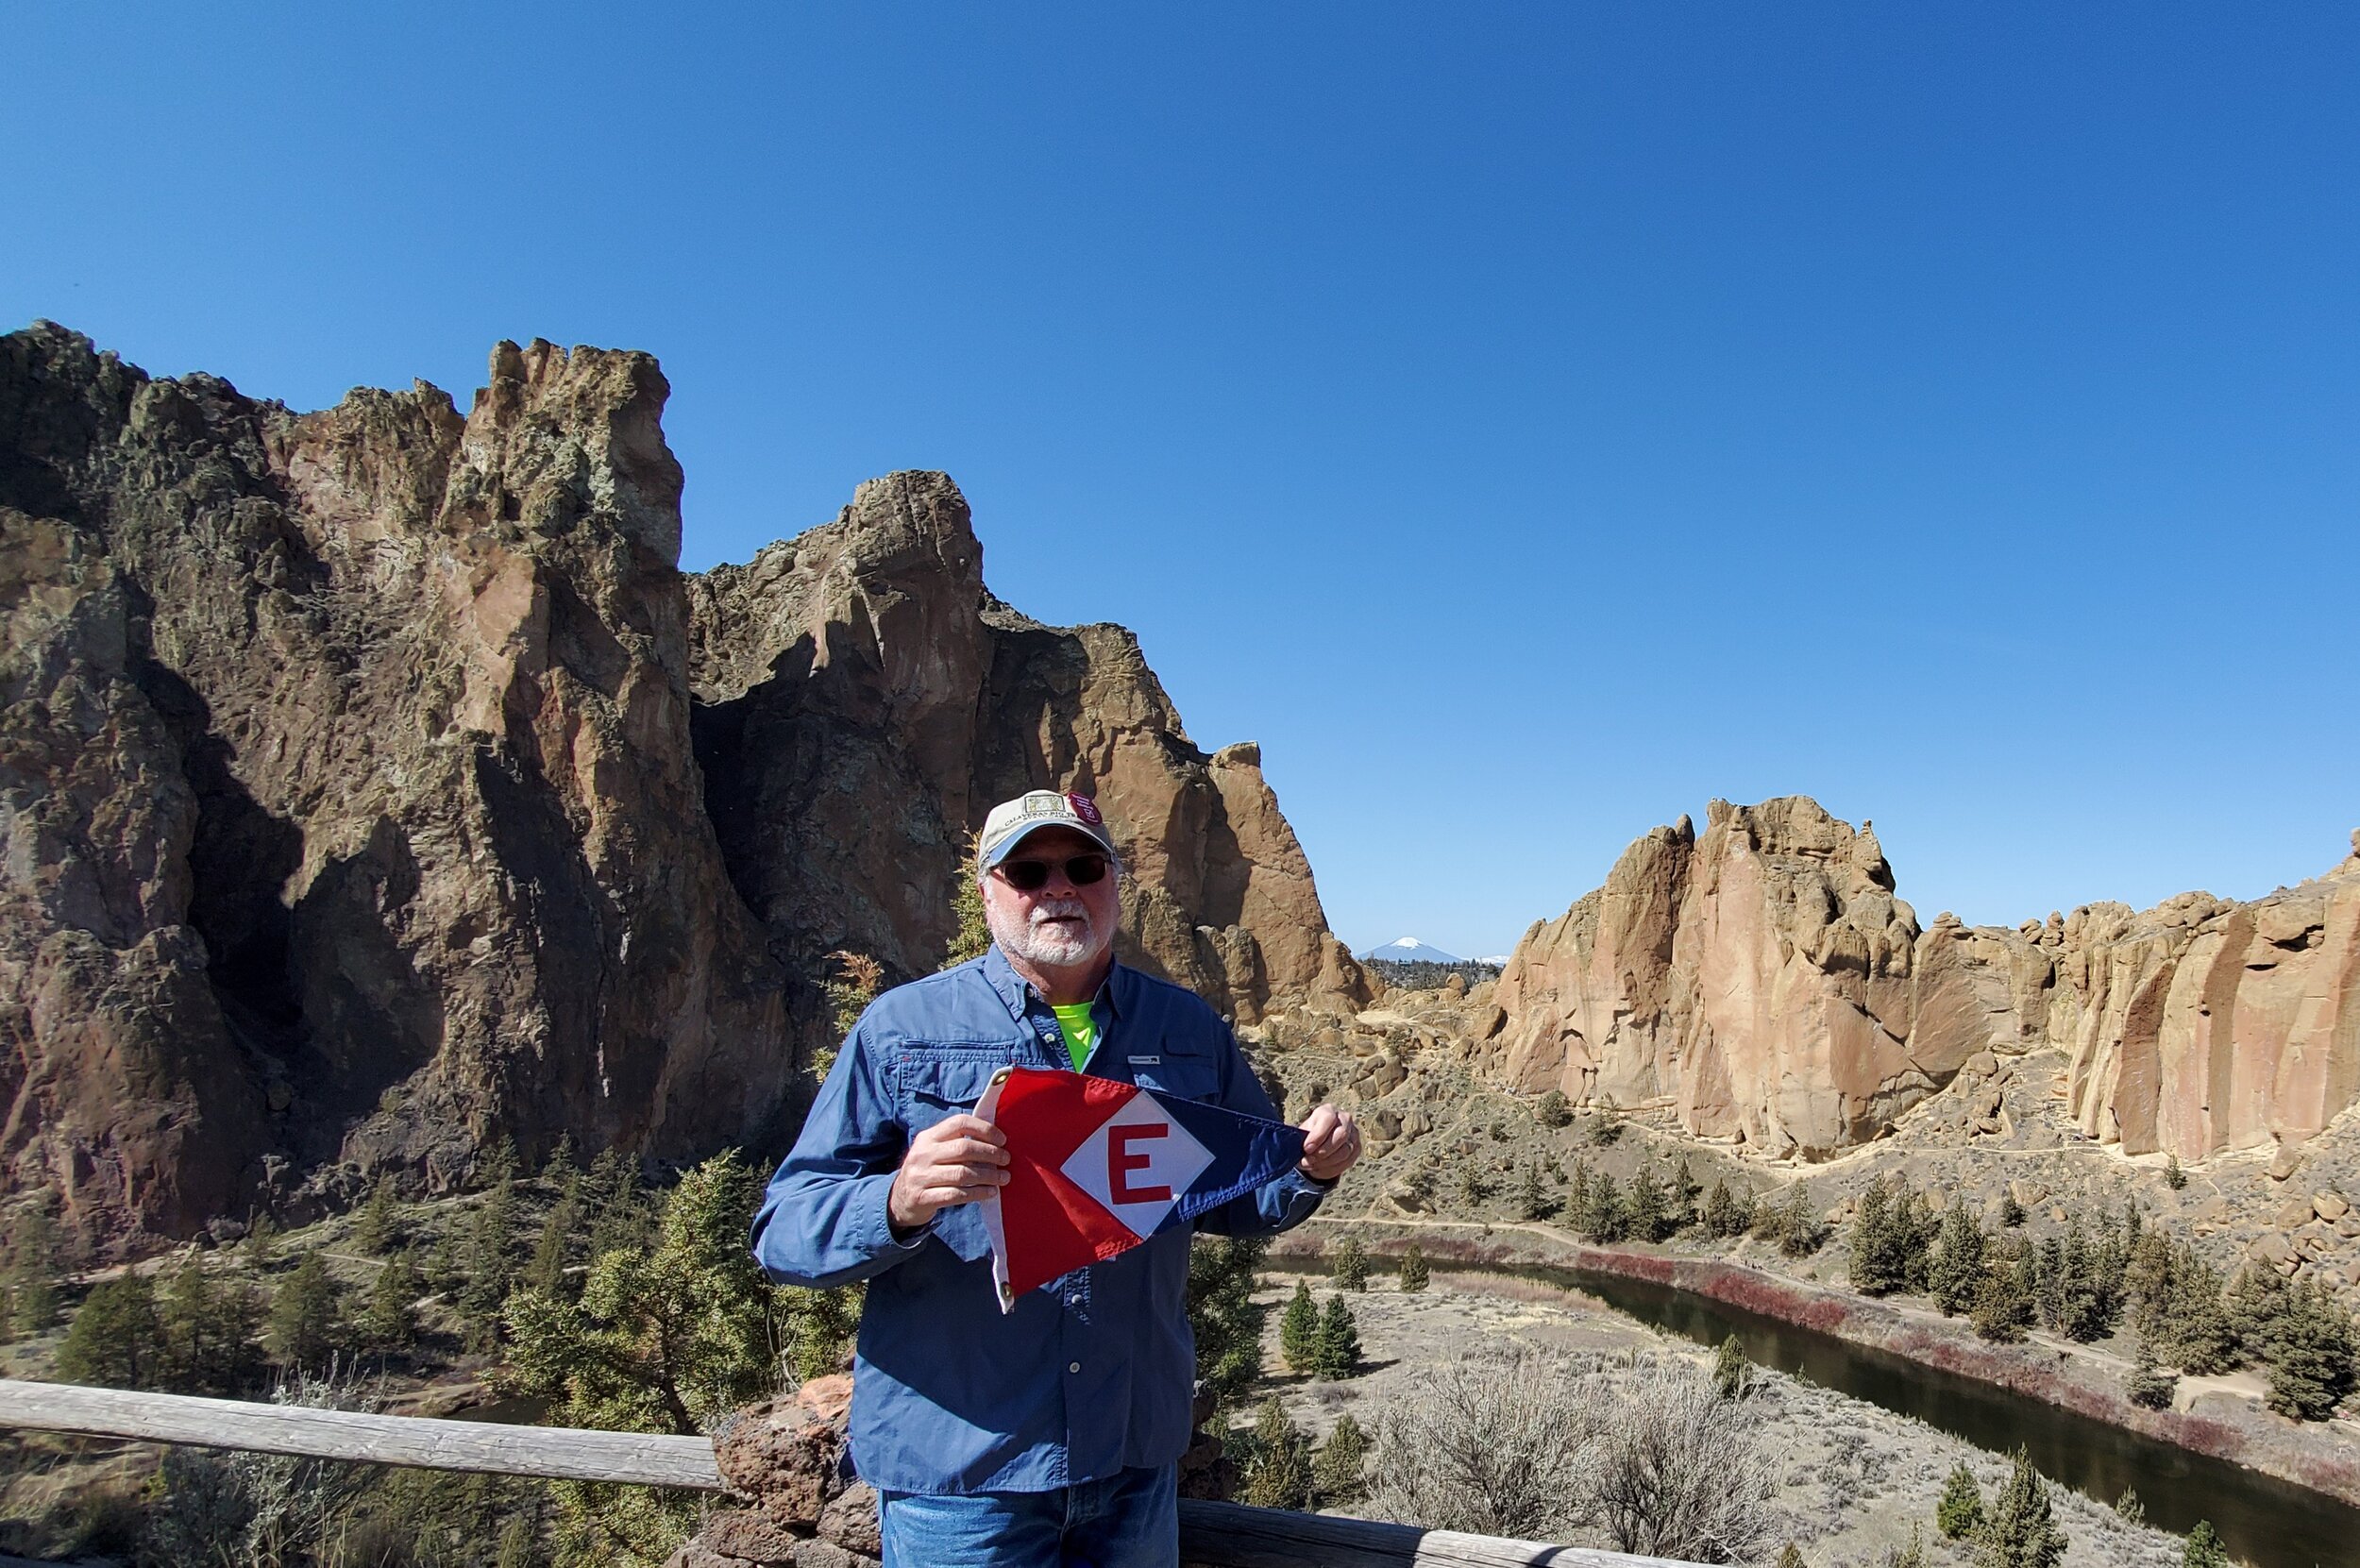  Murray flies the colors at Smith Rock  